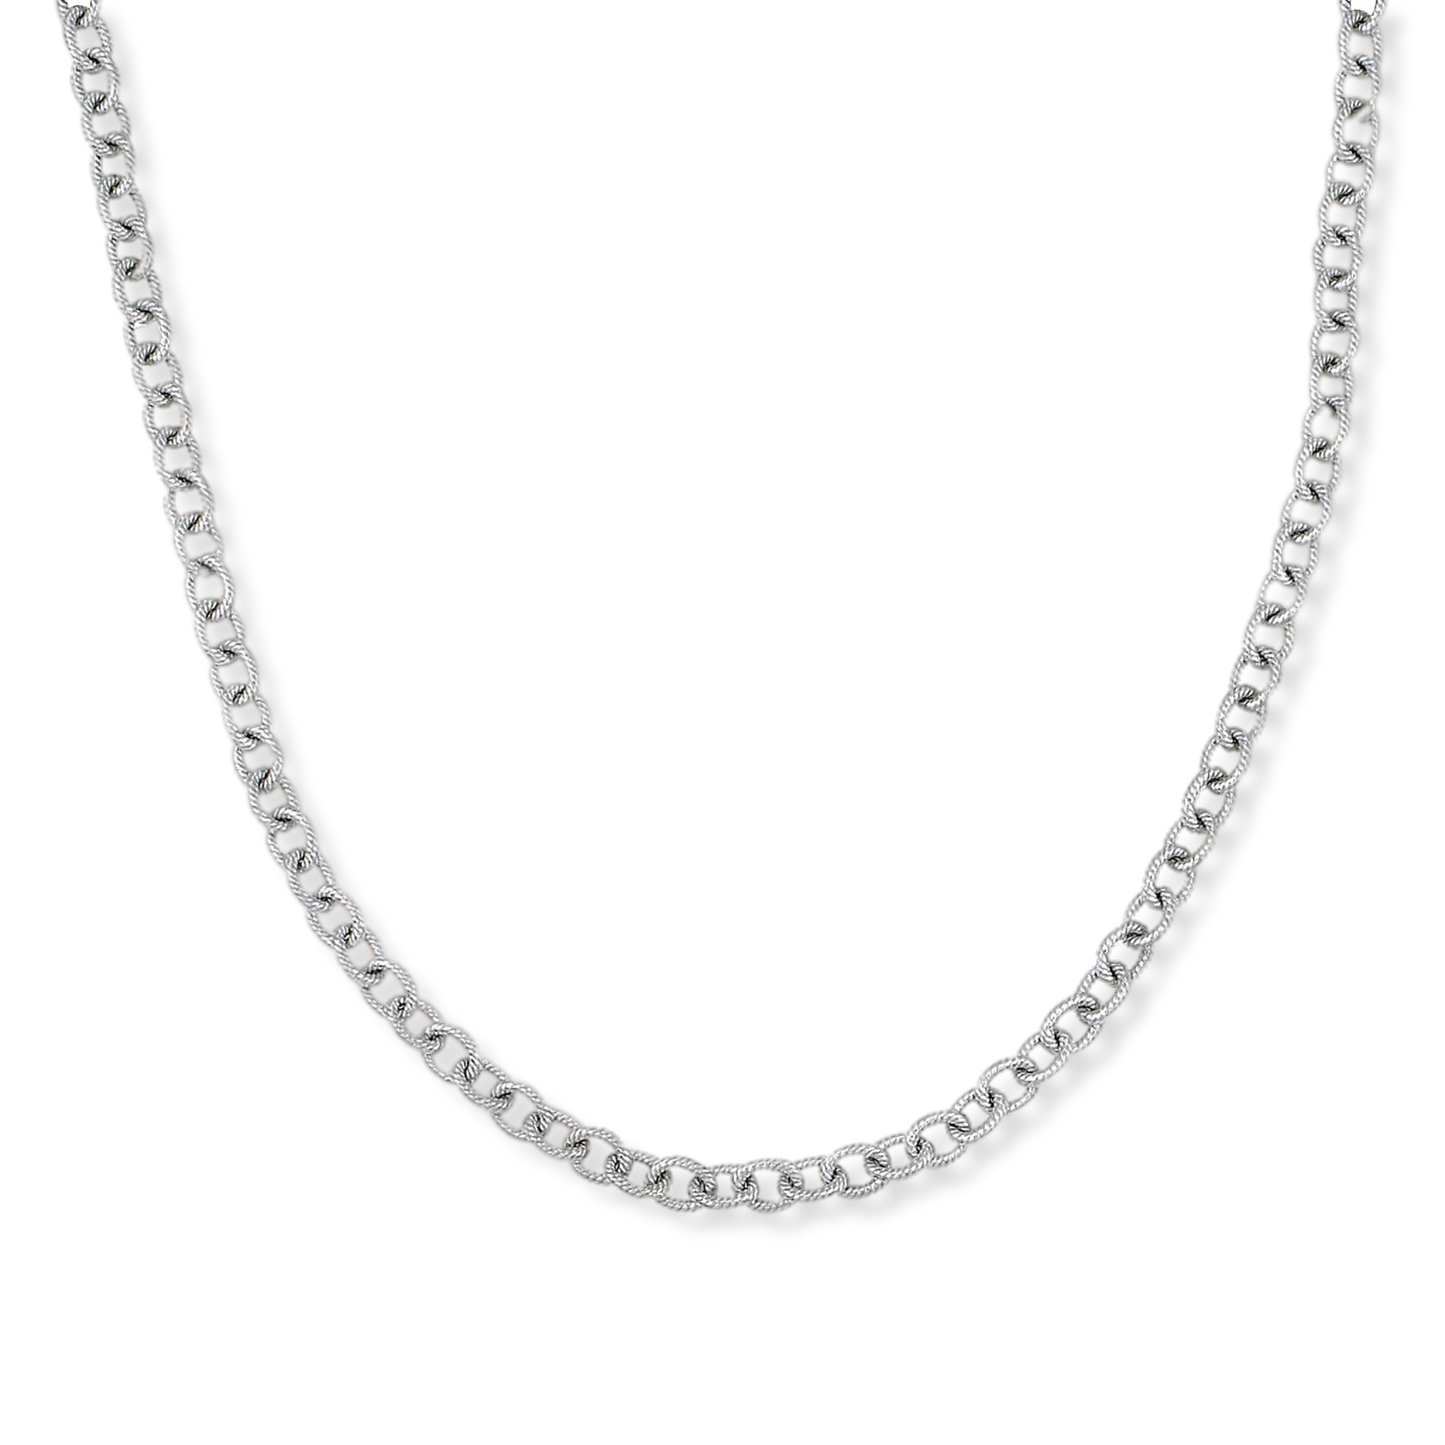 Franco Stellari Italian Sterling Silver Textured Oval Cable Link Necklace, 18"